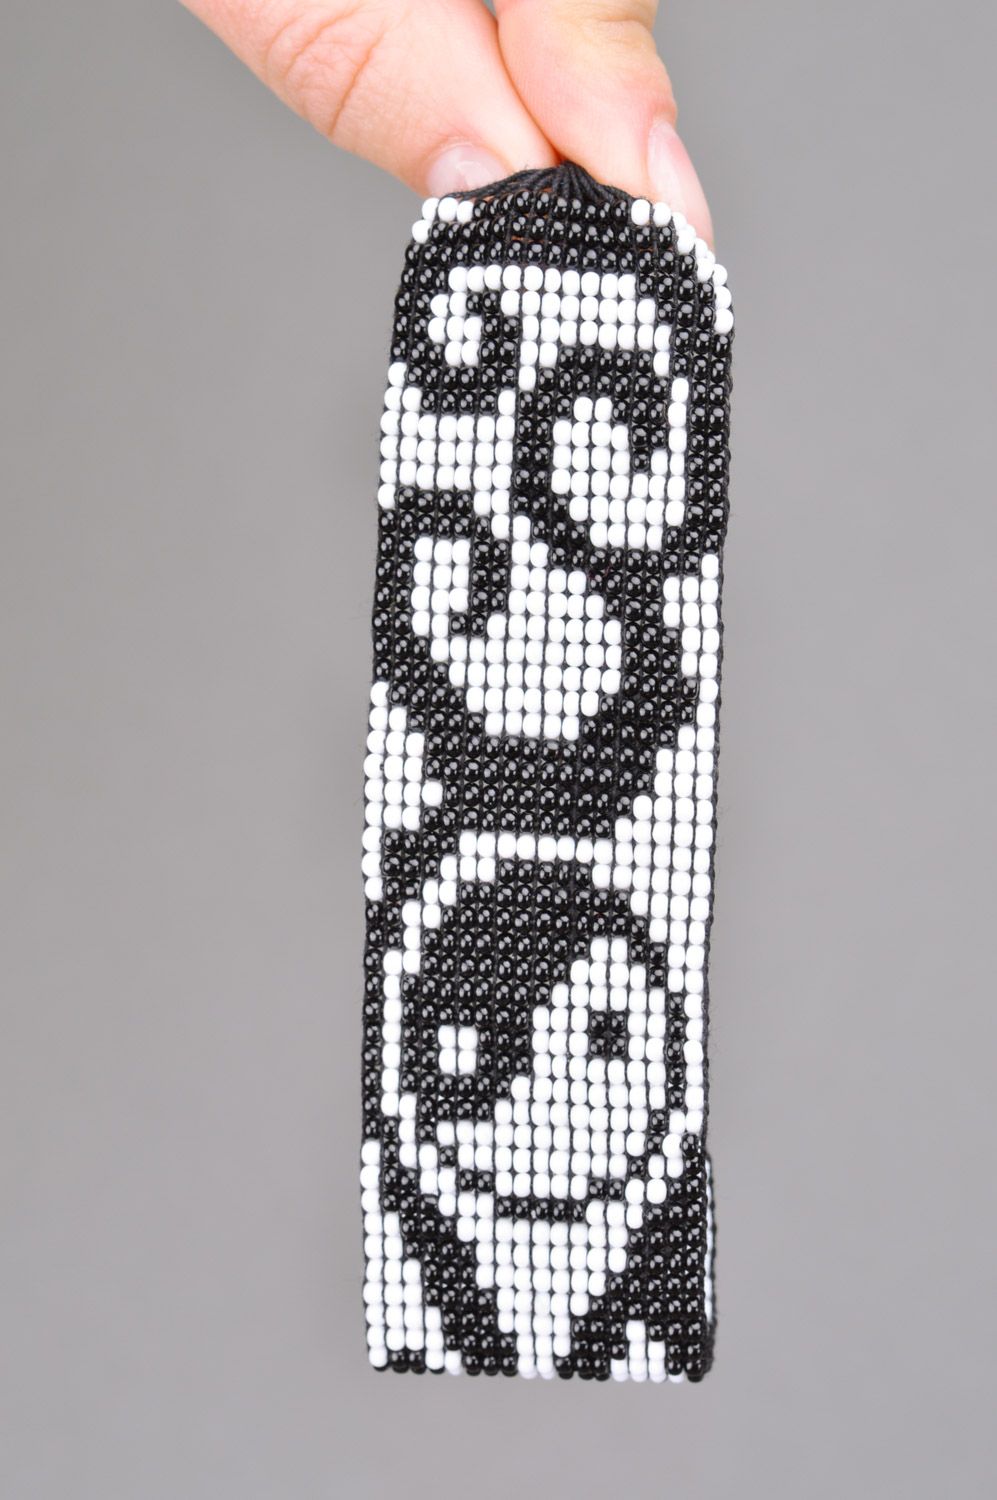 Handmade beaded wide bracelet with ties and black and white pattern photo 3